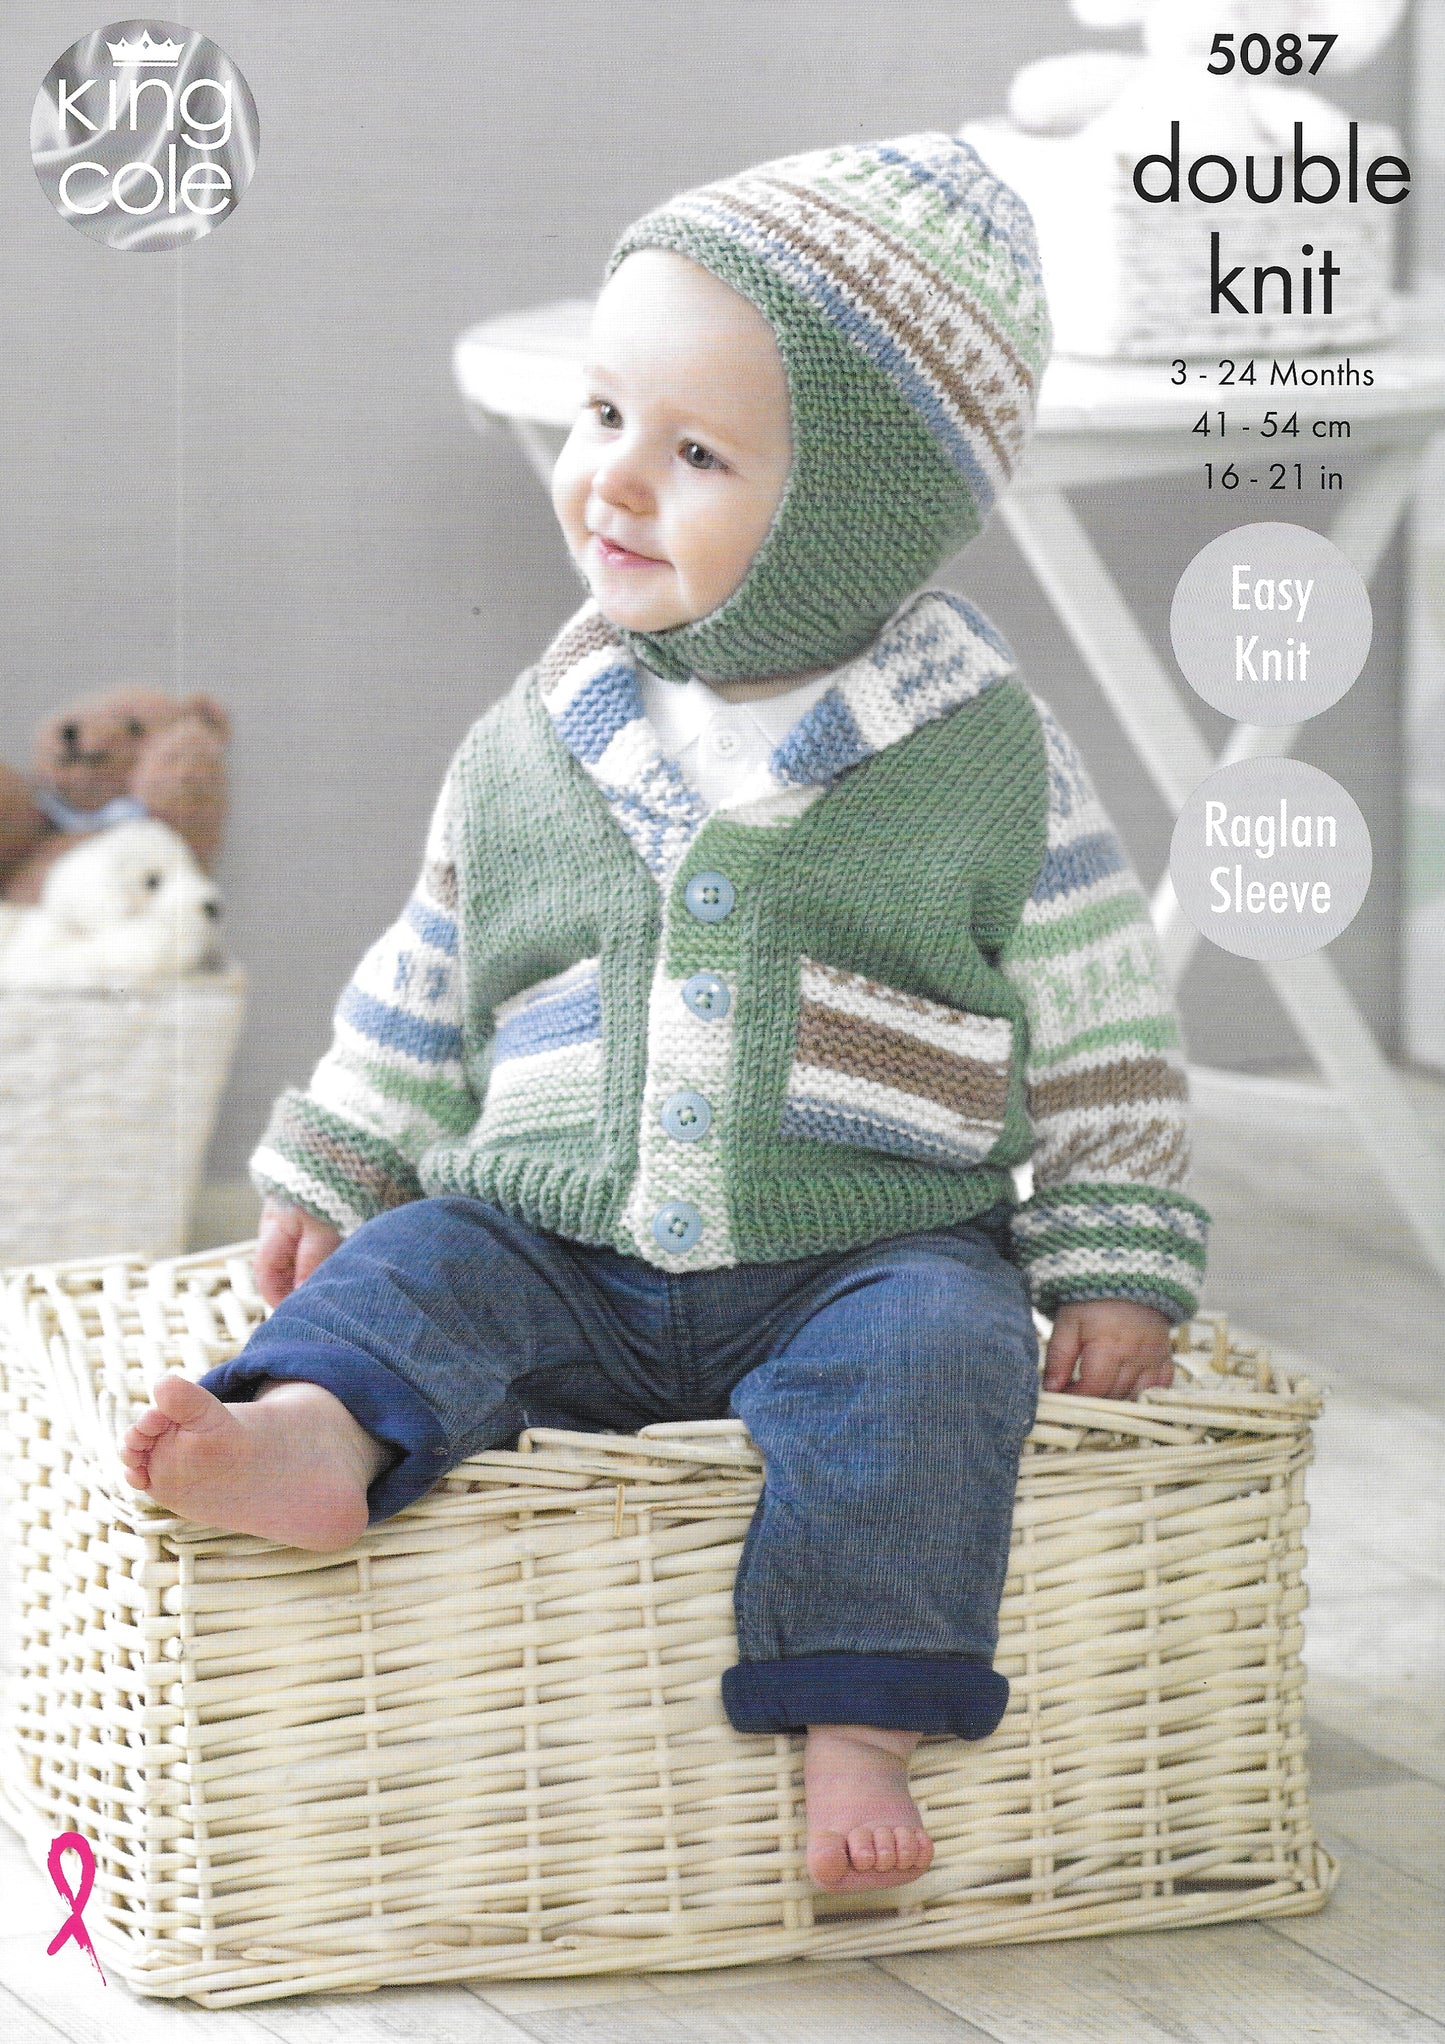 5087 King Cole double knit Baby Jackets/Gilet/Hat knitting pattern